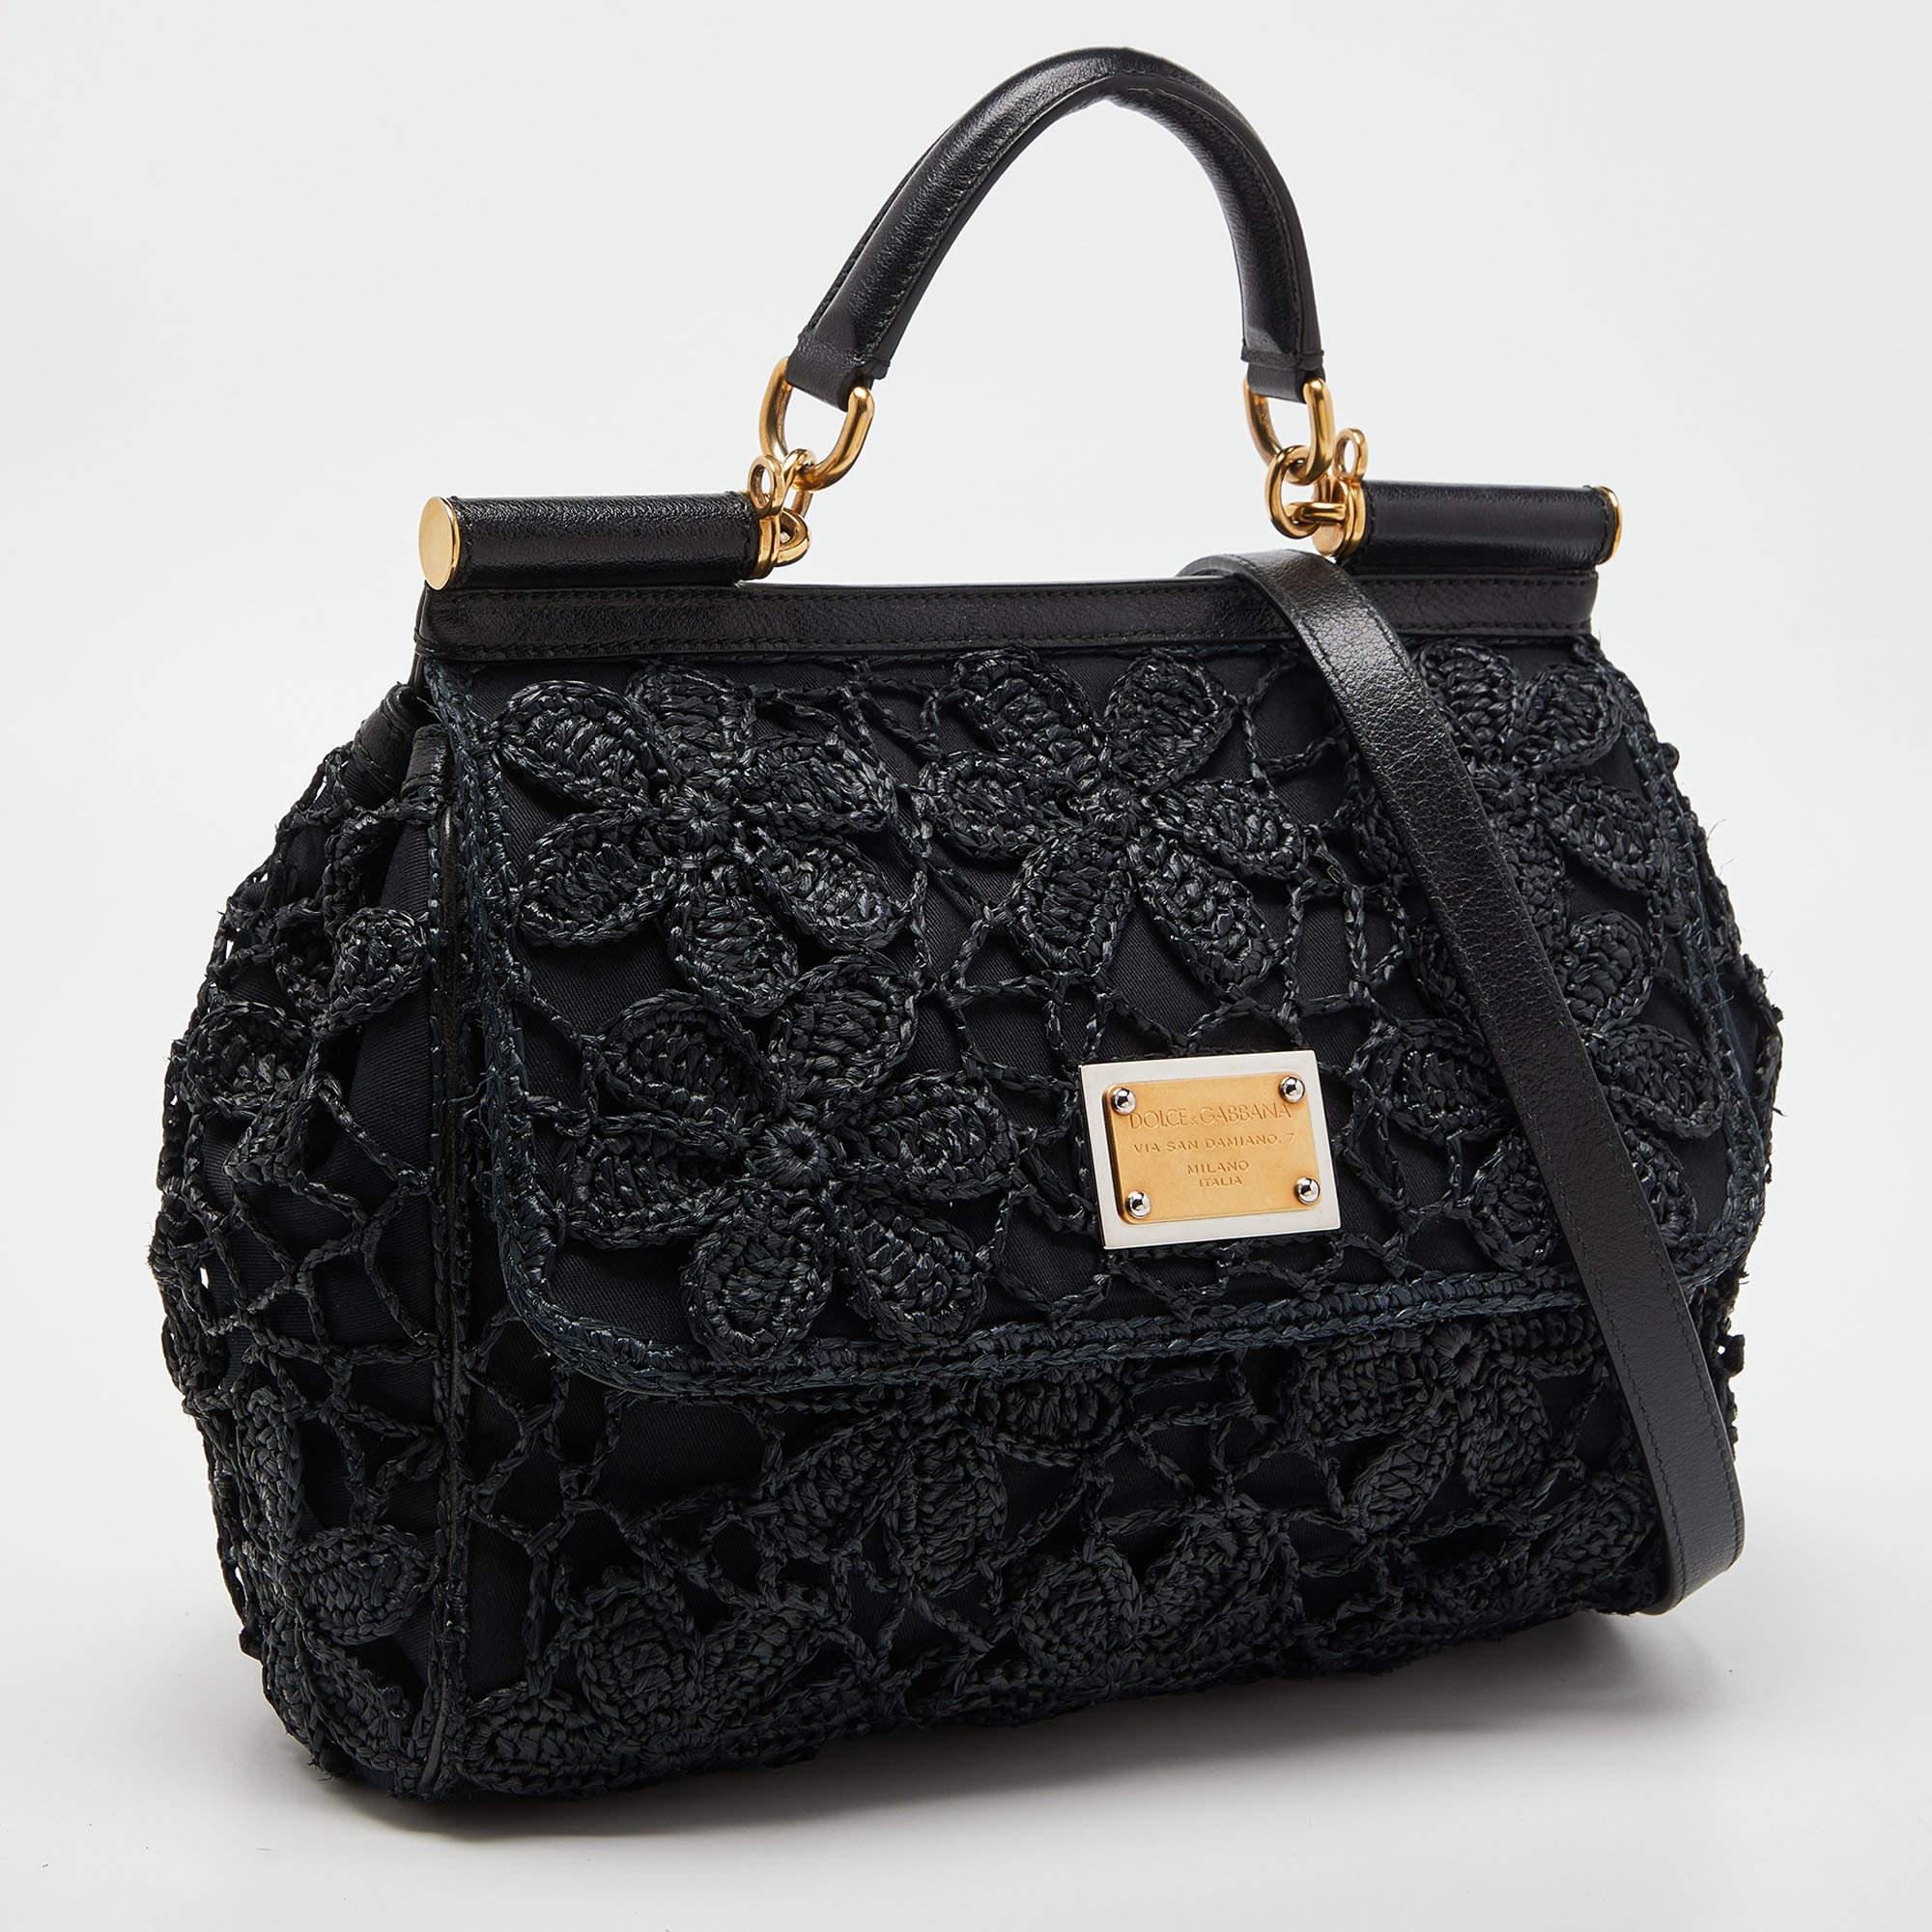 The iconic Miss Sicily bag by Dolce & Gabbana is named after Domenico Dolce's native land and exhibits the aesthetic of Italian glamour. The bag is crafted into a neat silhouette and is complemented with luxe hardware.

